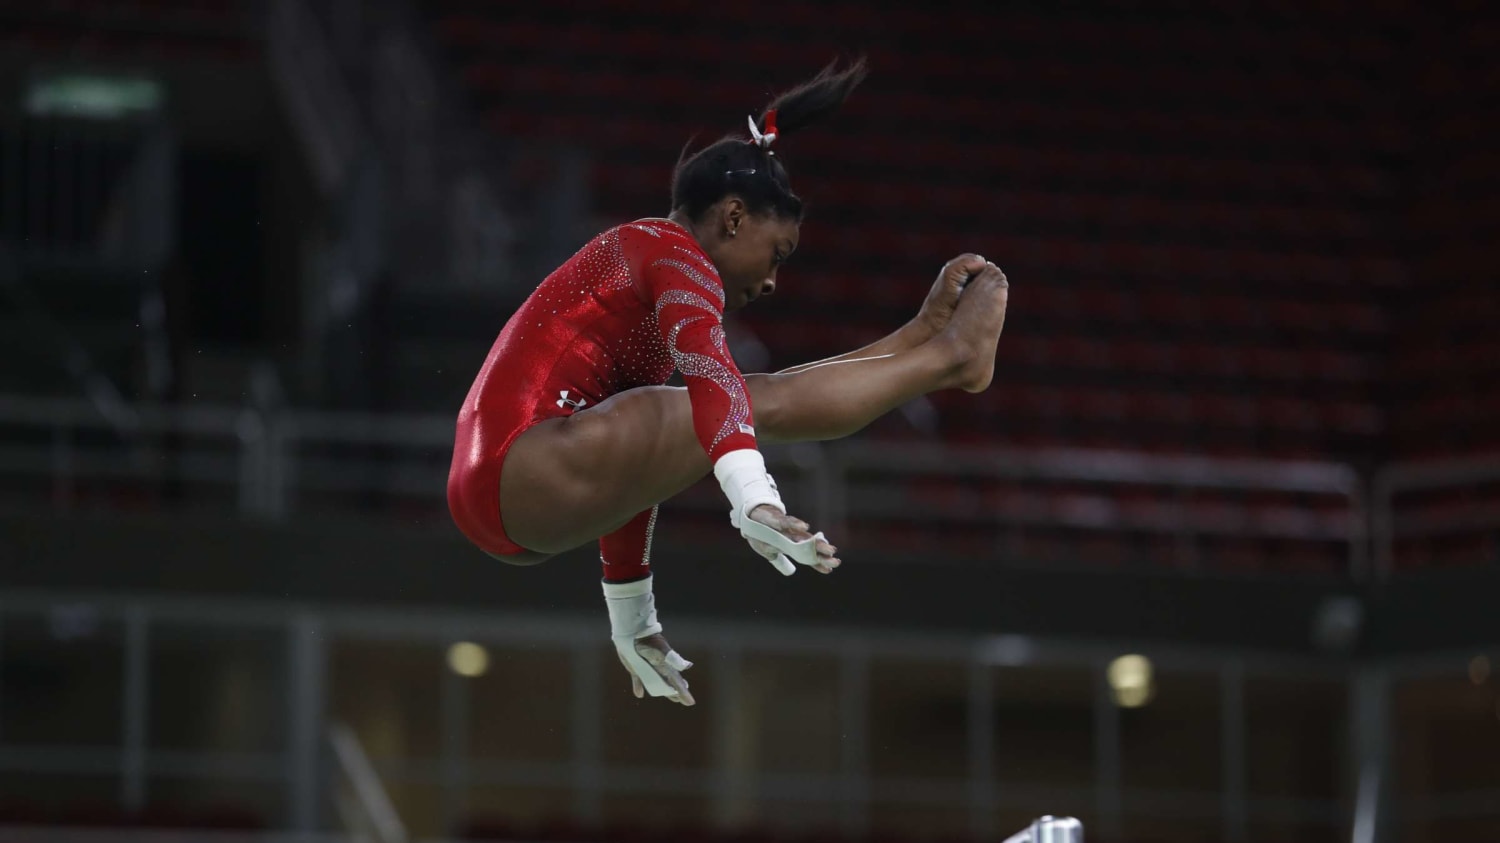 Simone Biles Just Became the Most Decorated Female Gymnast in History